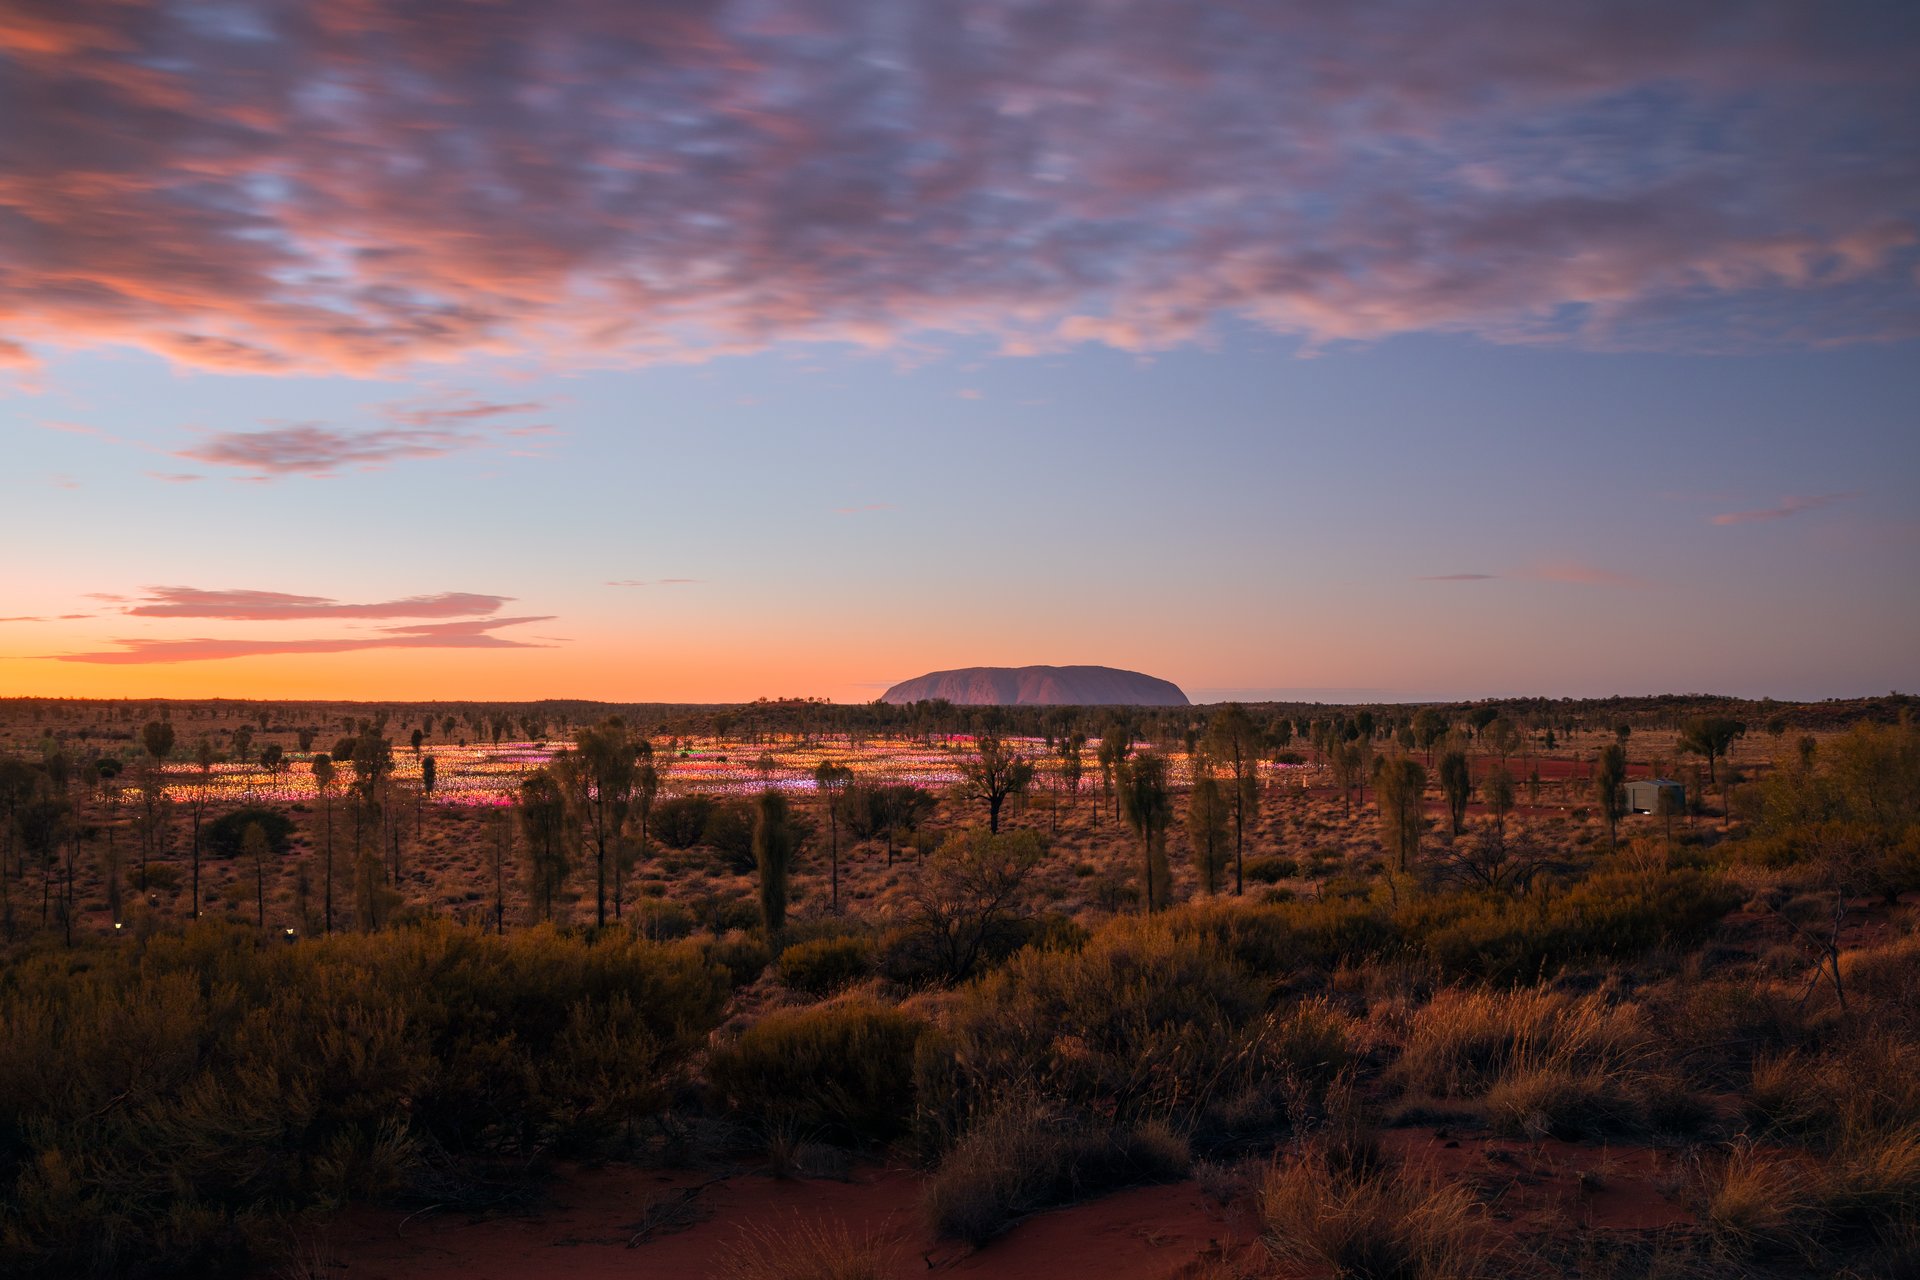 All about the Centre 4 day Red Centre luxury itinerary